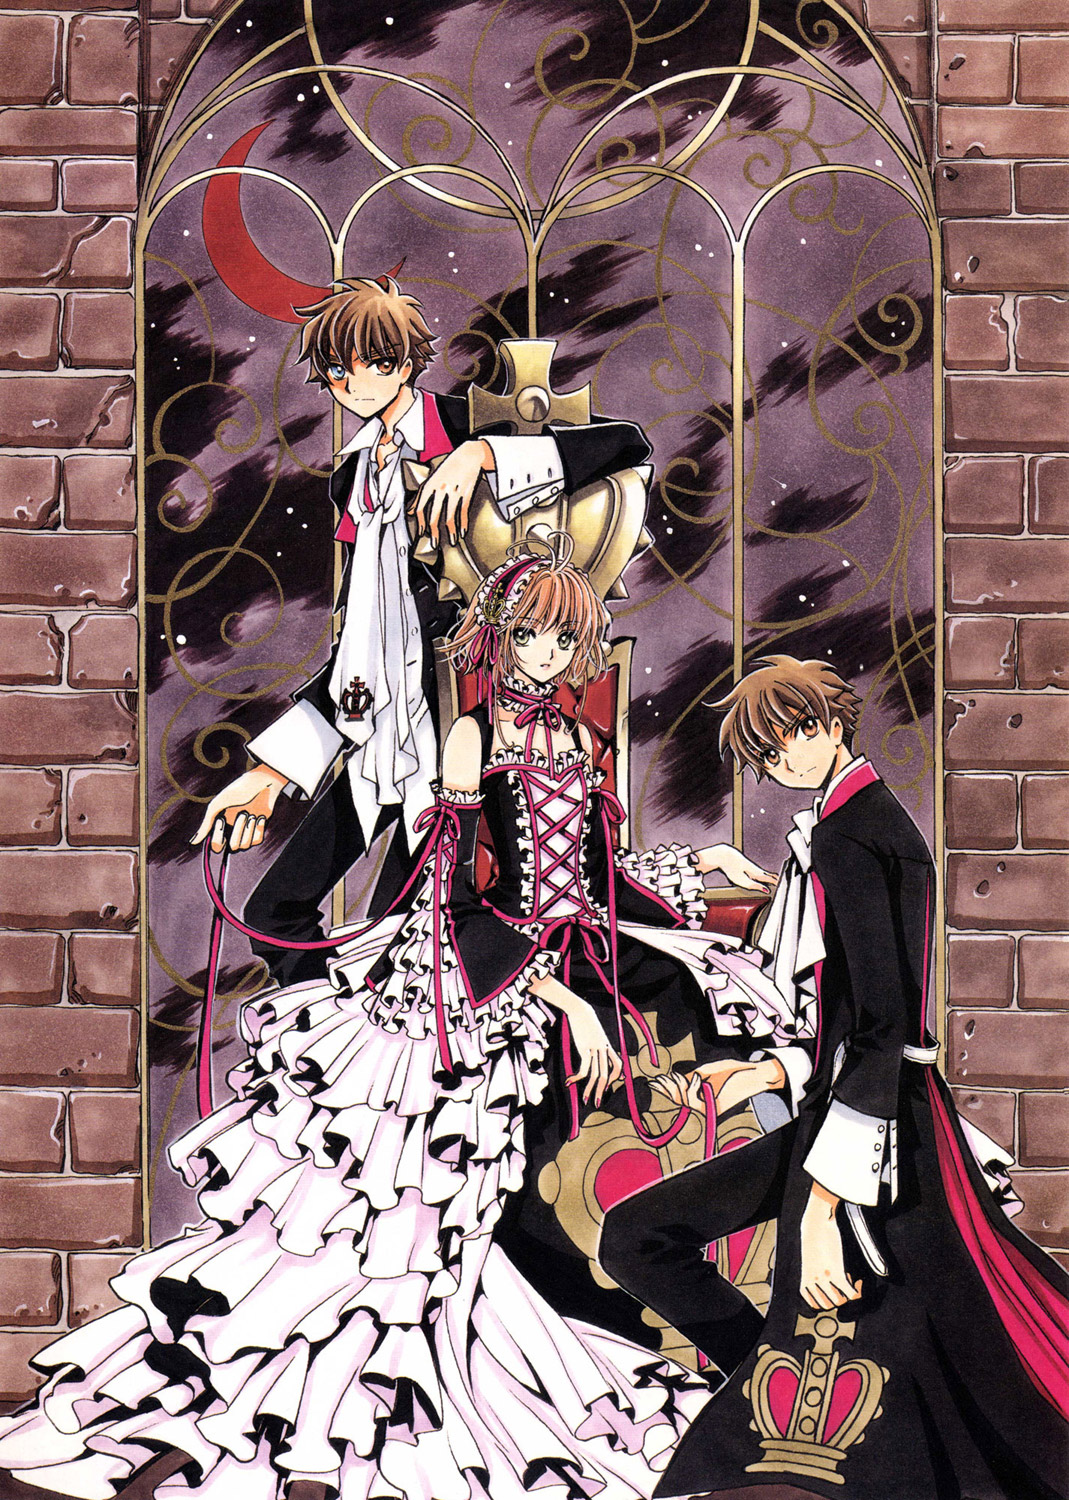 Clamp Calendar 2008 image by Clamp